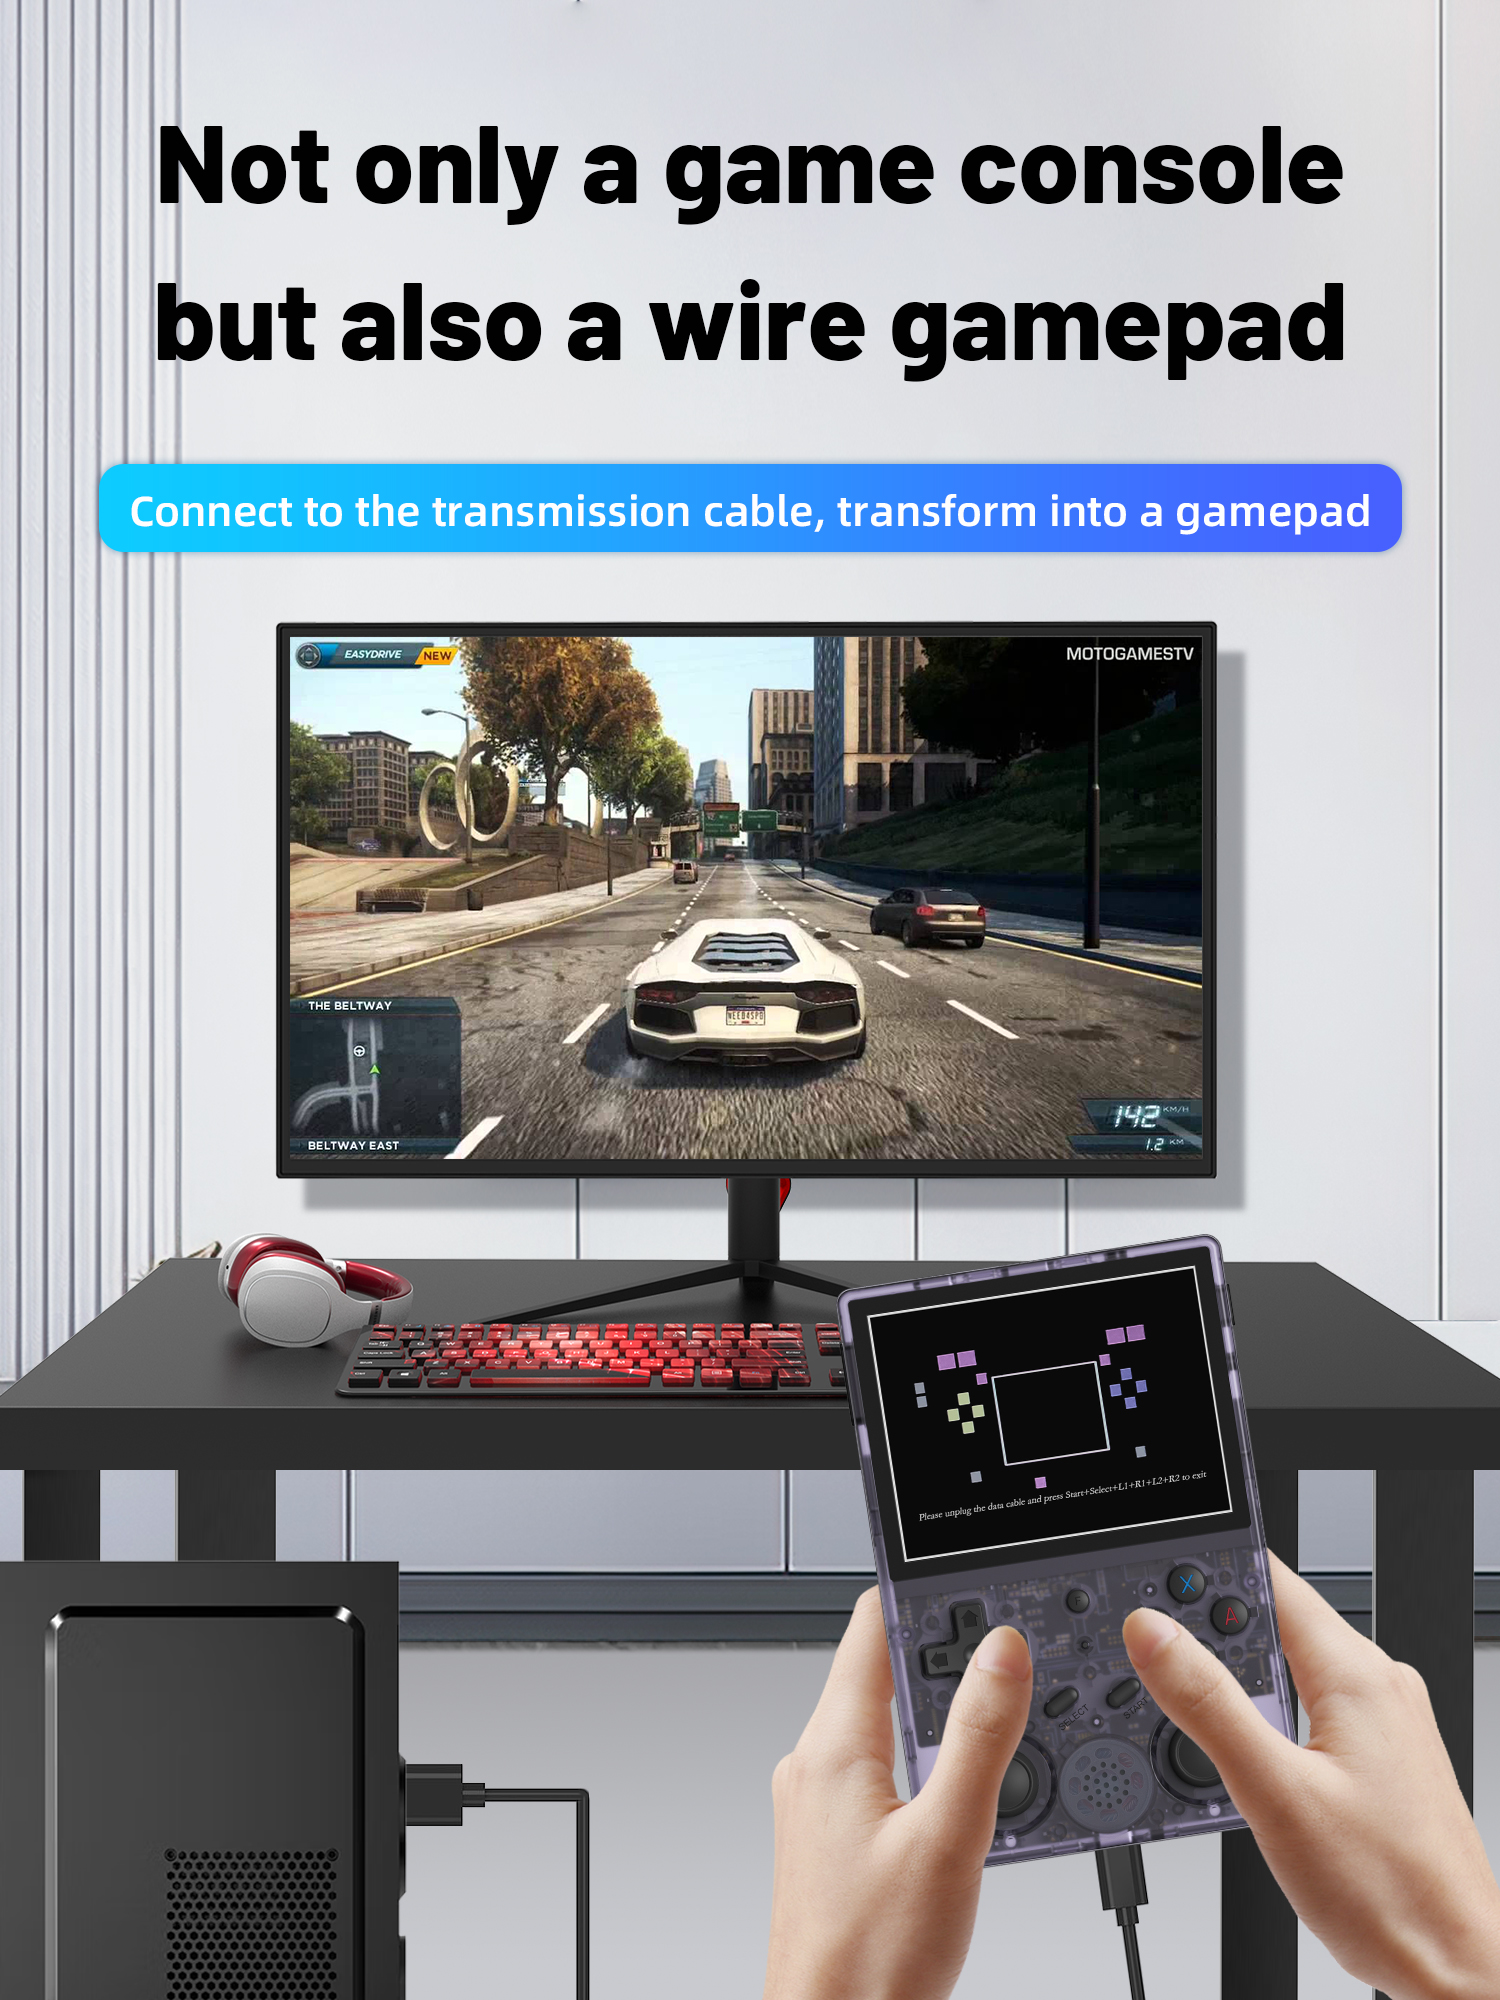 ANBERNIC RG353V 64GB 15000 Games Android Linux Dual OS Handheld Game Console LPDDR4 2GB RAM eMMC 5.1 32GB ROM 5G WiF BT4.2 3.5 inch IPS Full View Retro Video Game Player